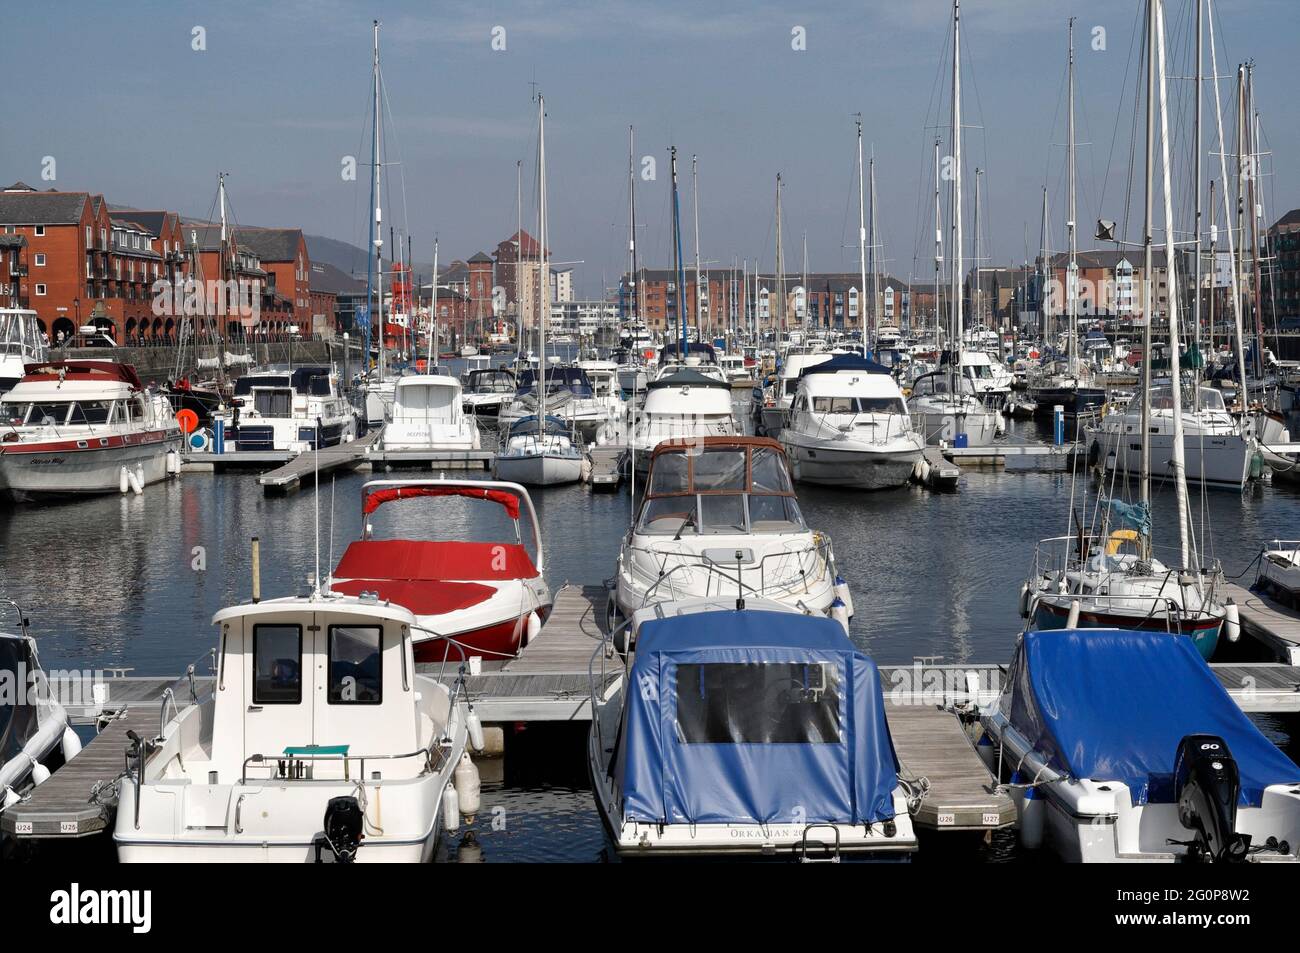 The expanse of Swansea marina in the old town dock, Wales UK Stock Photo